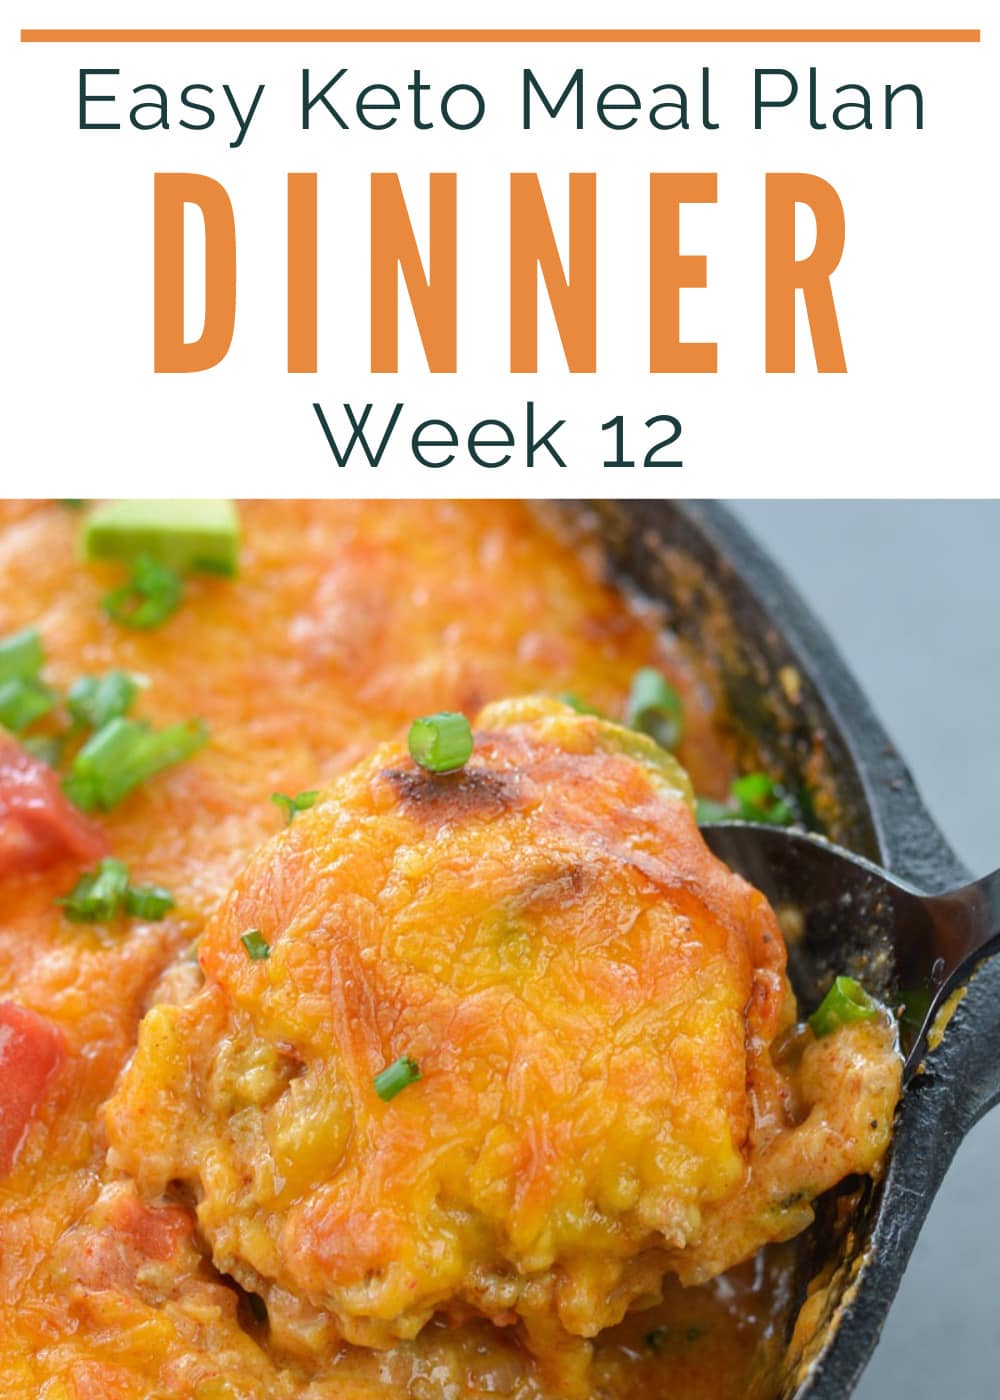 Ready to try keto but not wanting to spend hours meal planning? I'm here to help! This week's Easy Keto Meal Plan includes 5 easy low-carb dinner as well as a keto-friendly dessert. I've included net carb counts, serving amounts, and a printable shopping list!